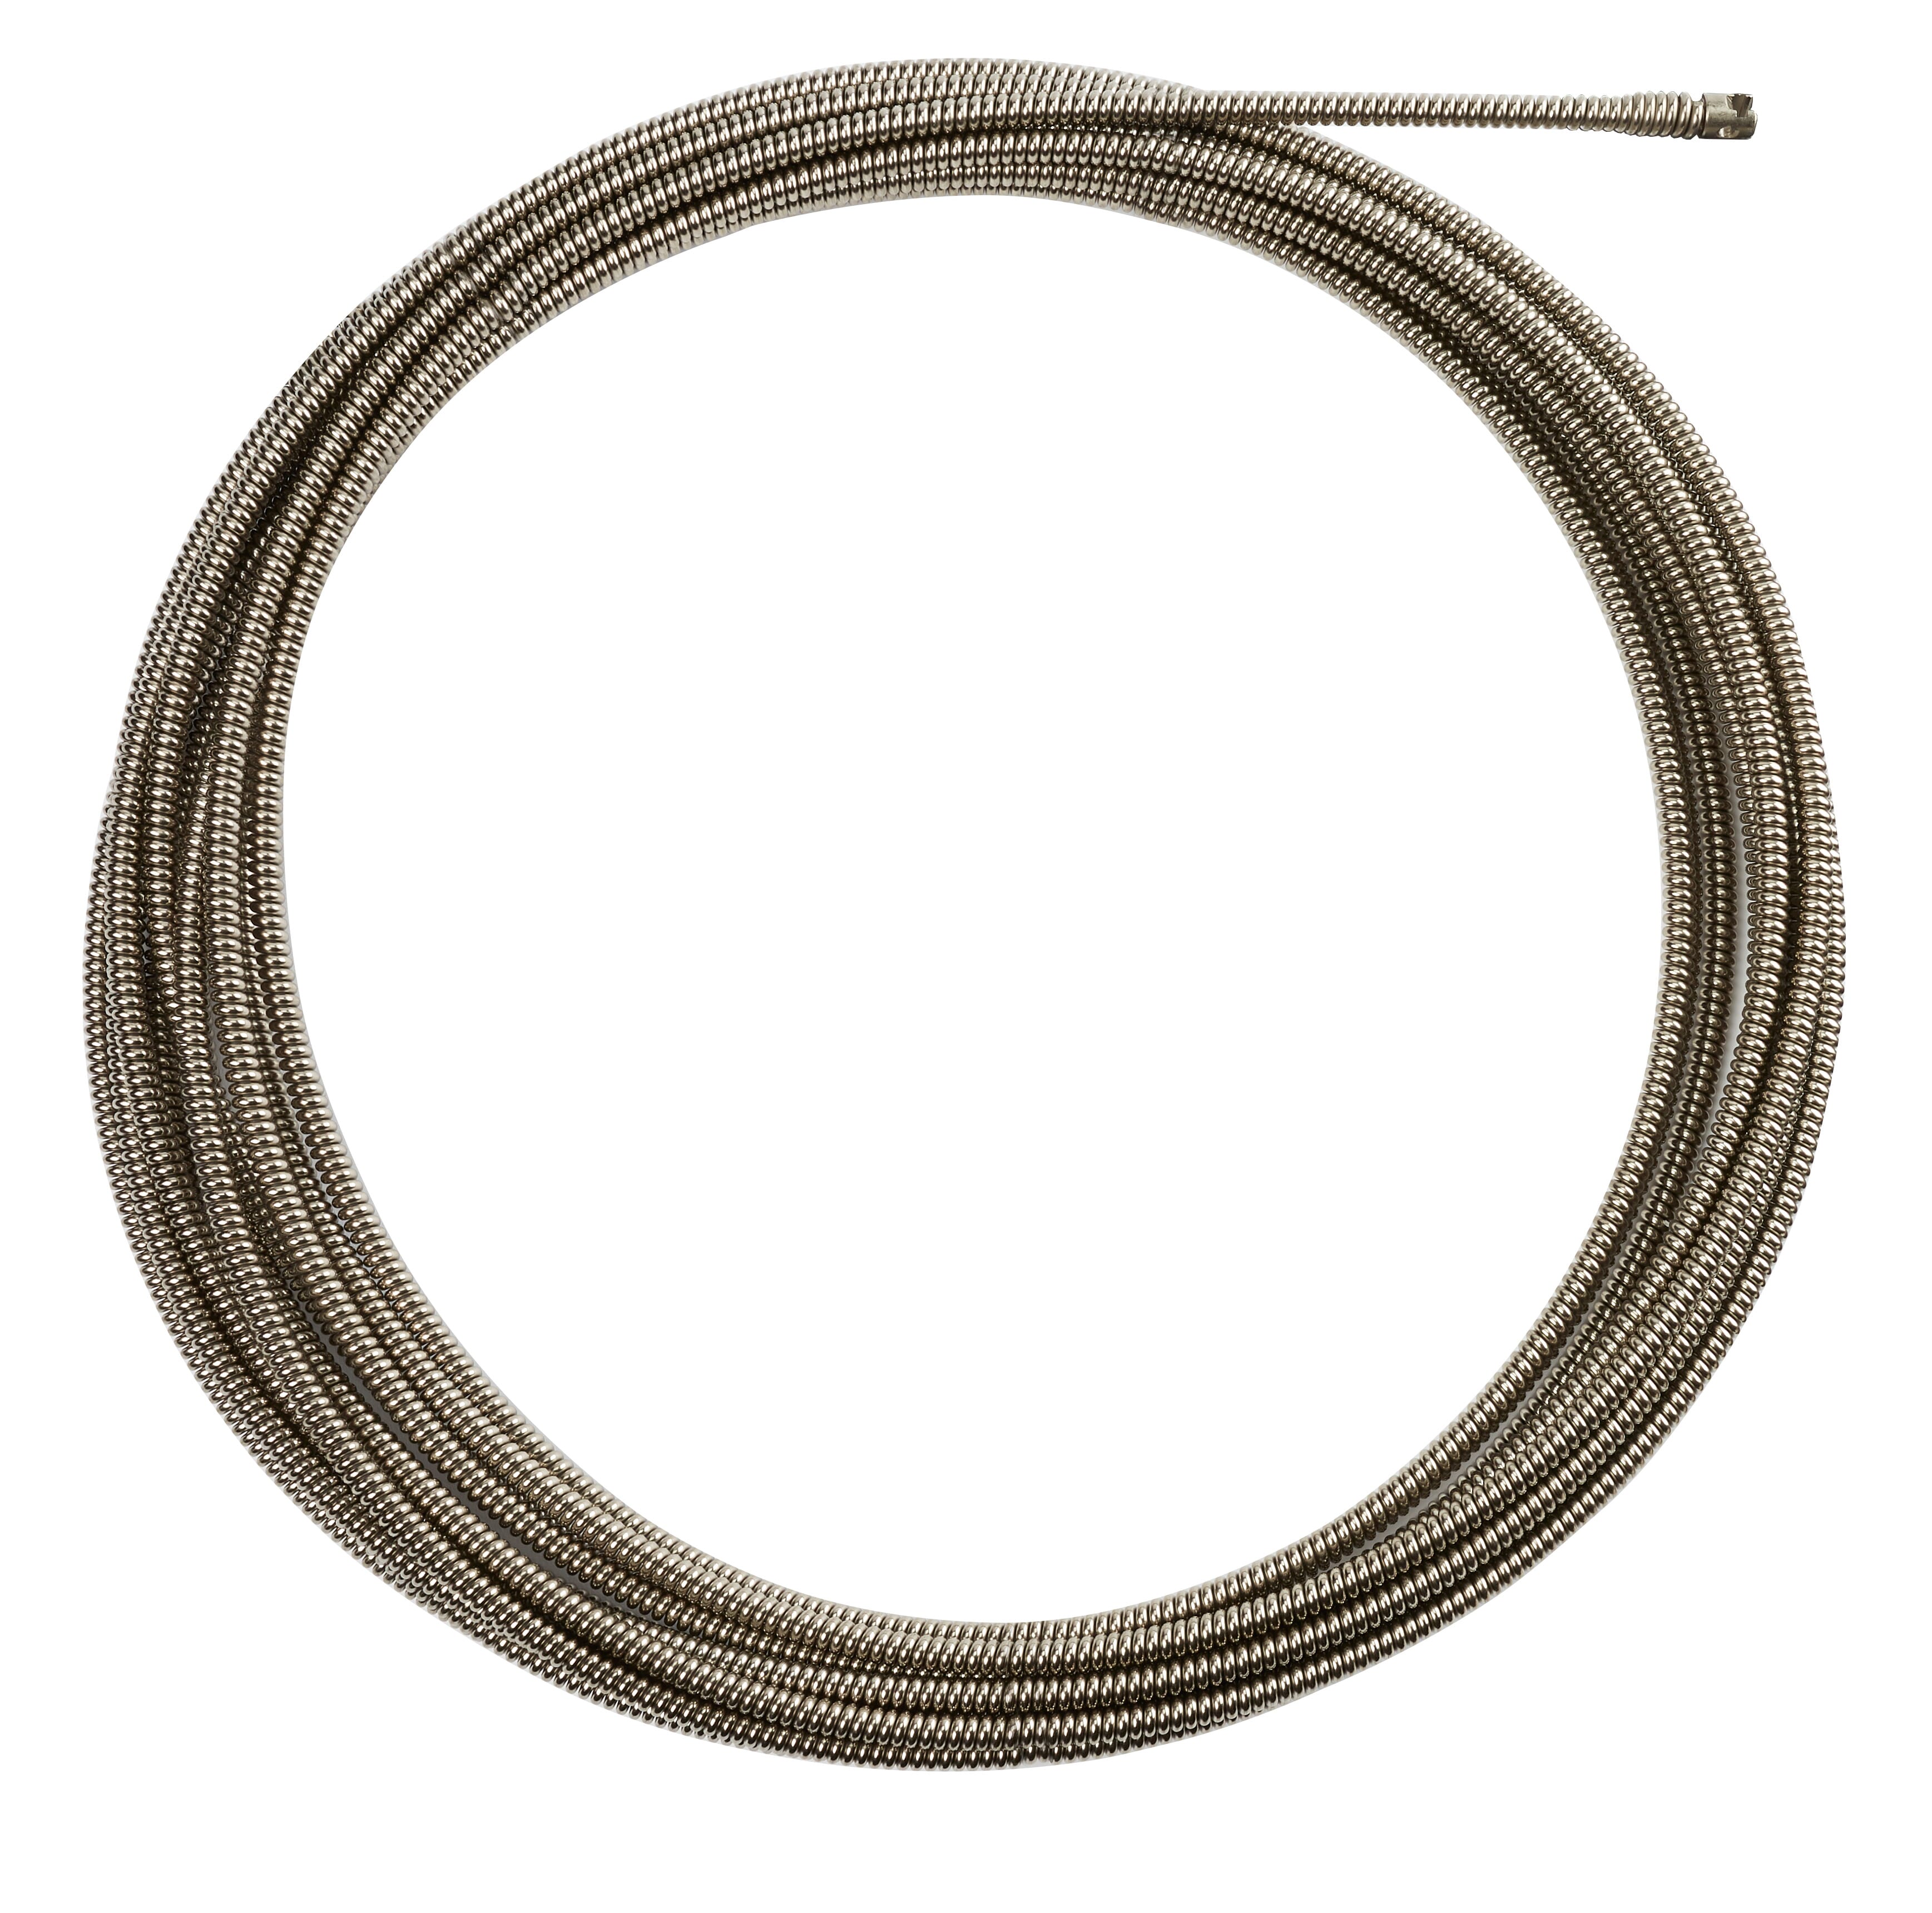 Milwaukee® 48-53-2773 Inner Core Coupling Drain Cleaning Cable, 3/8 in, Steel, For Use With Drain Cleaning Machines, 1-1/4 to 2-1/2 in Drain Line